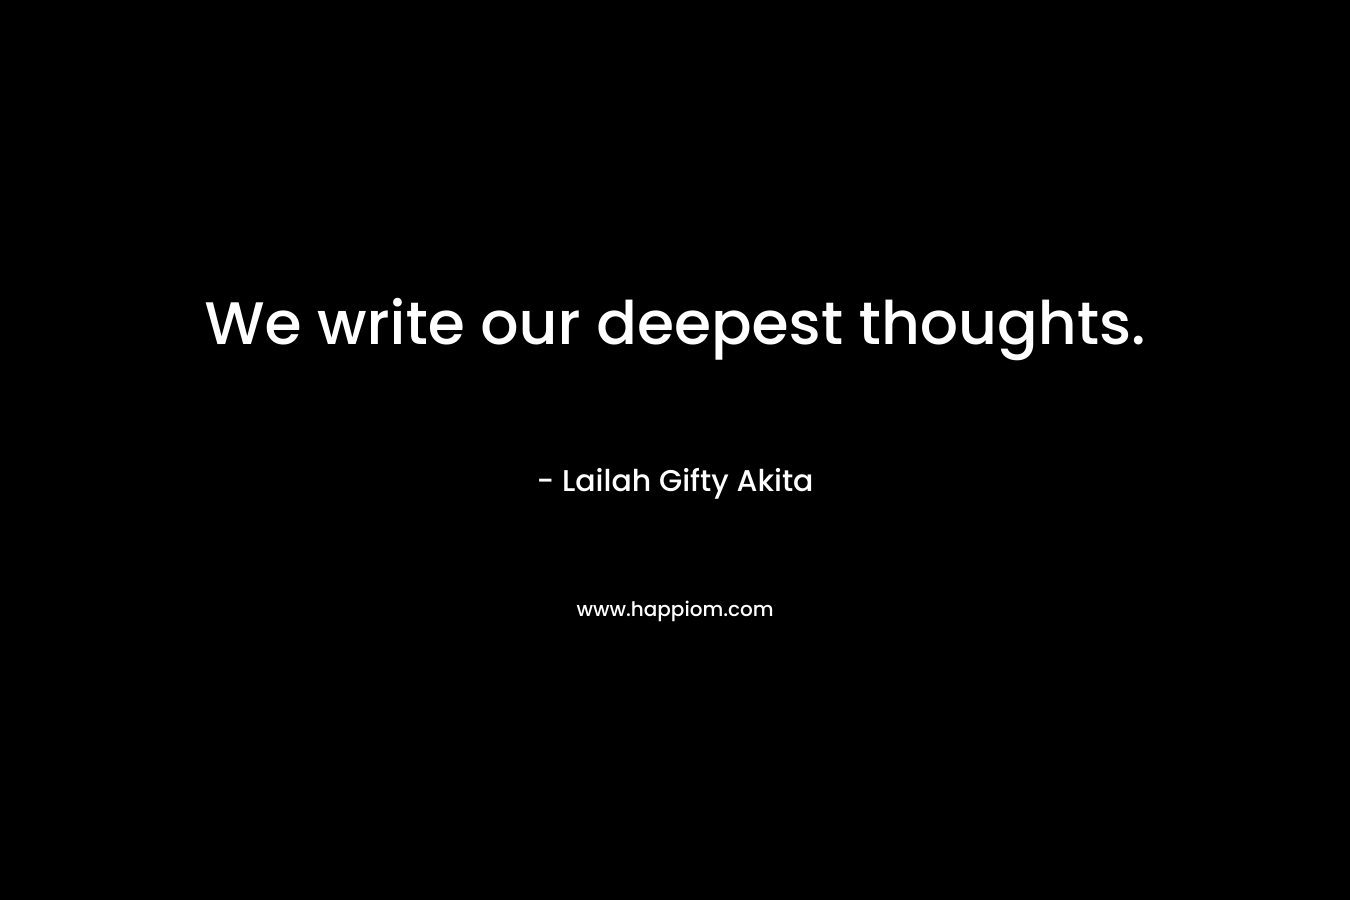 We write our deepest thoughts.